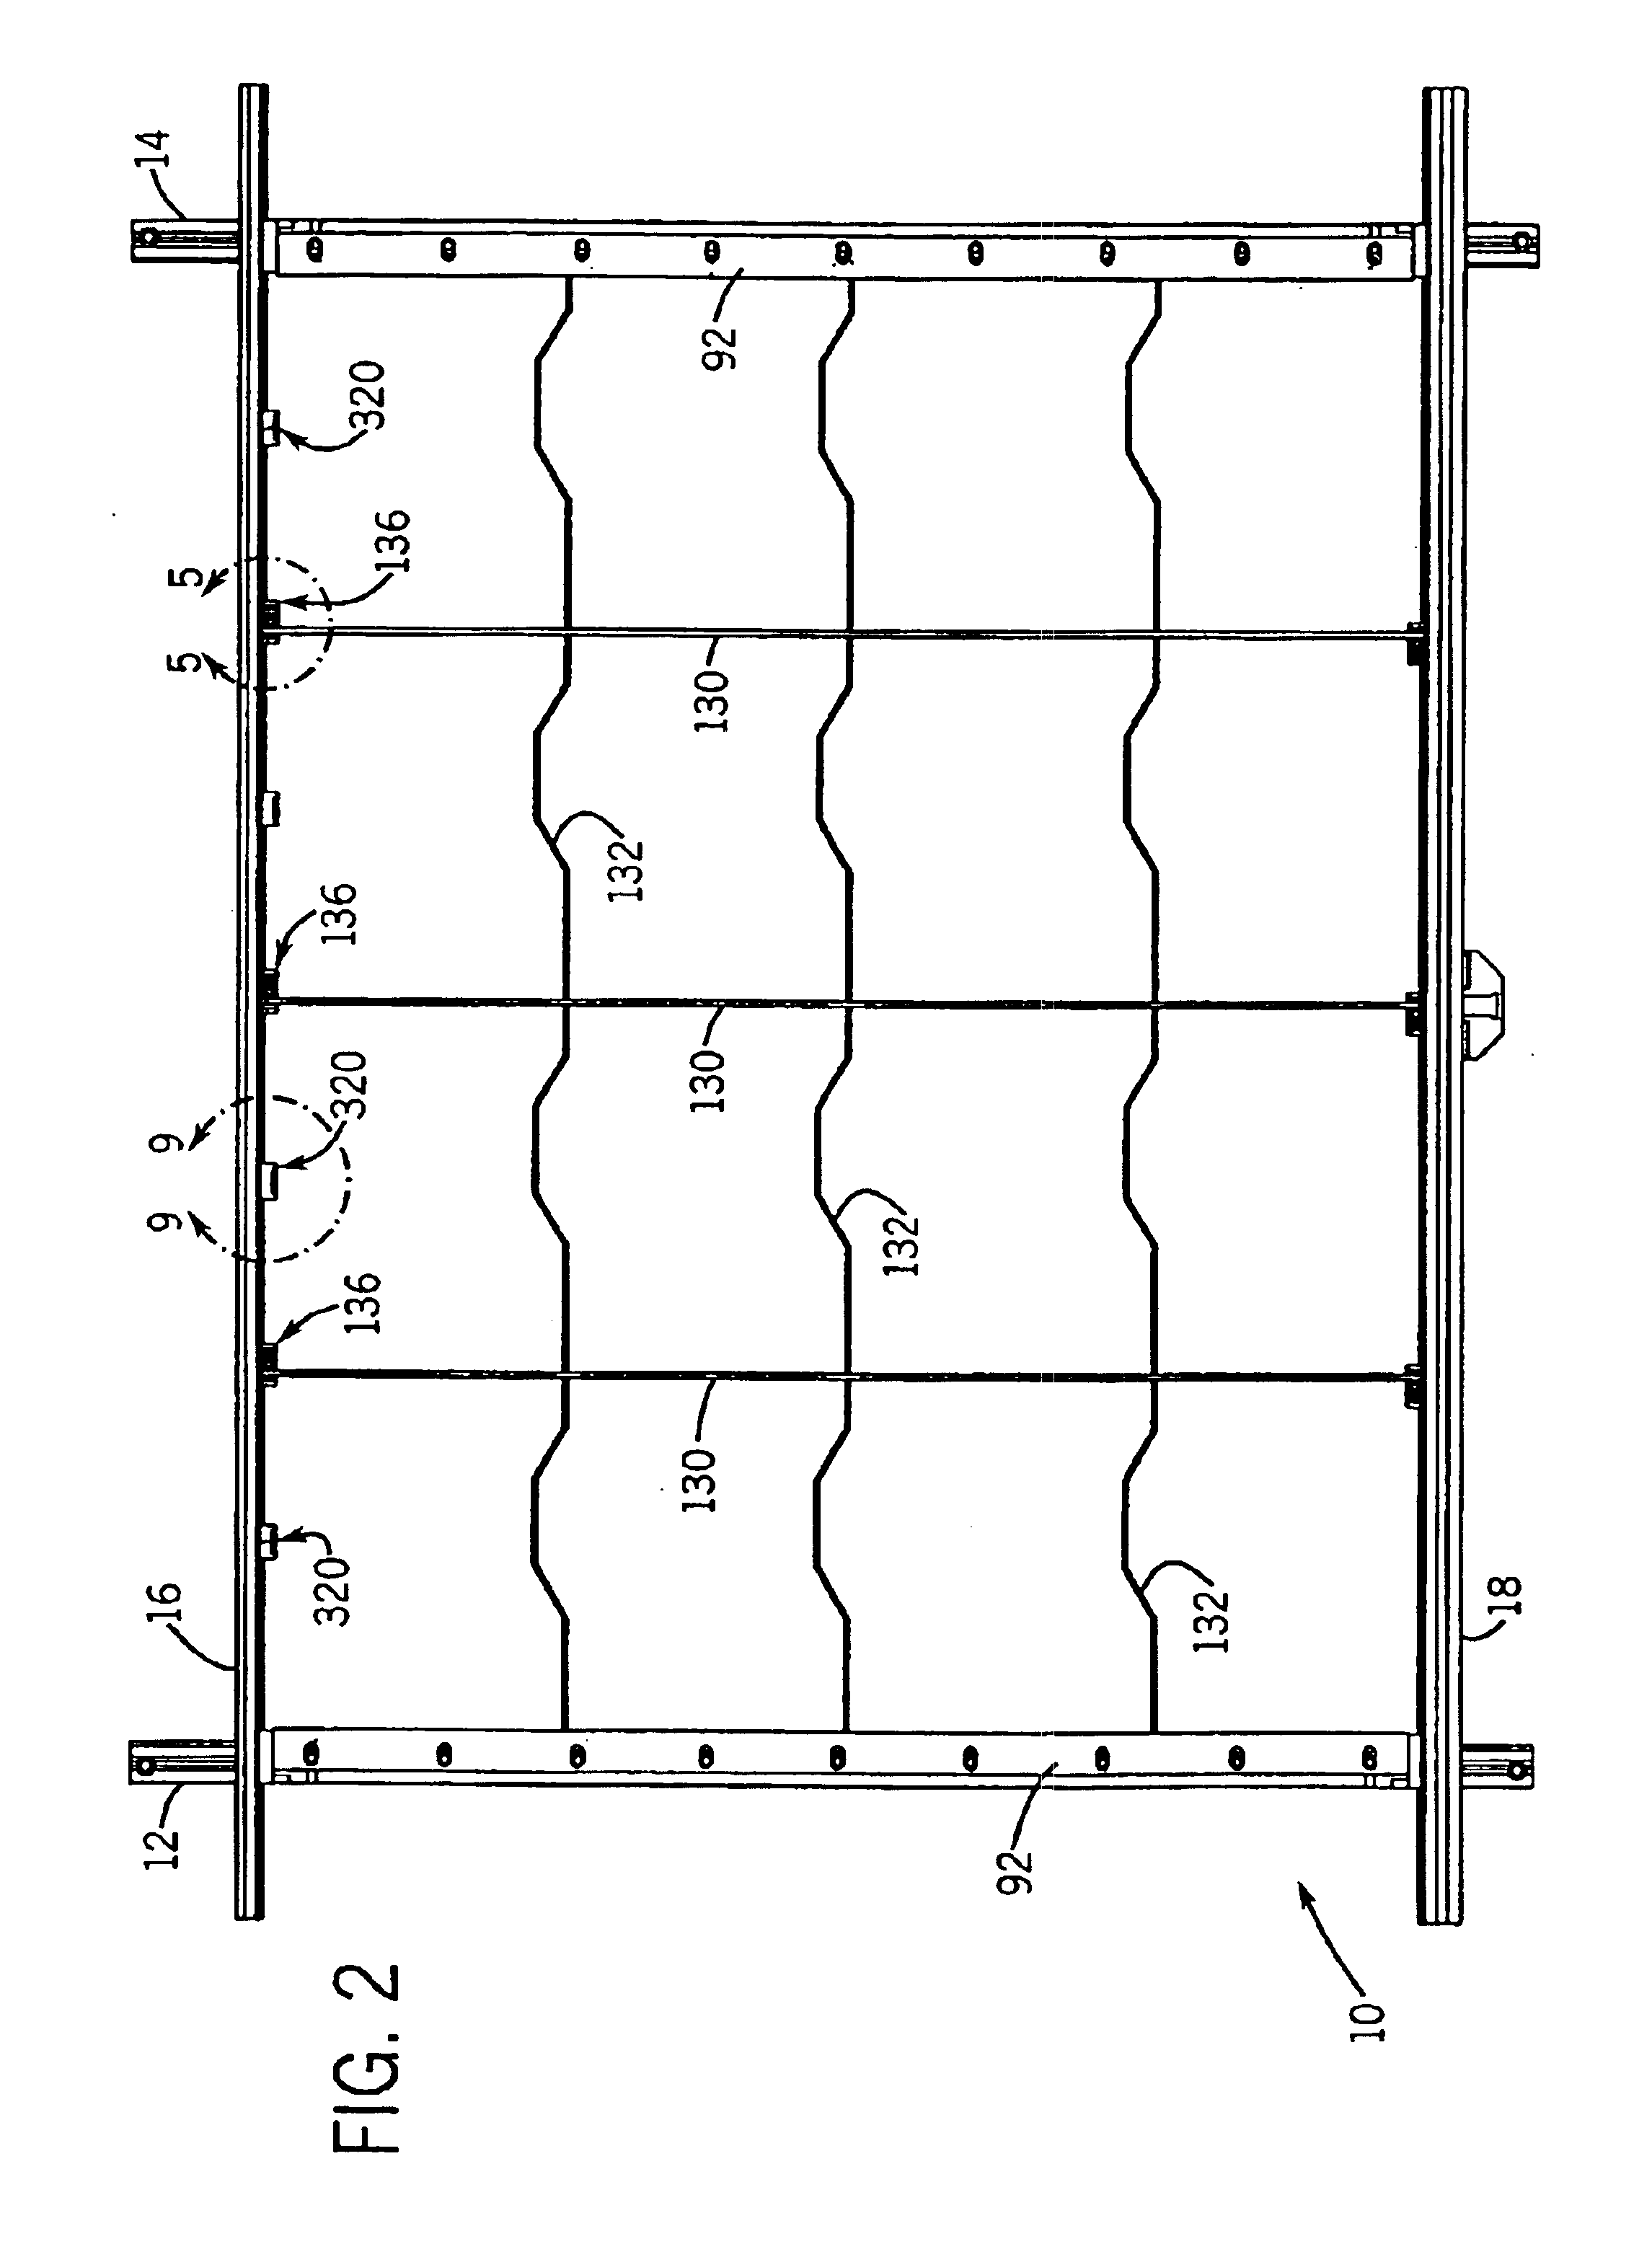 Stiffening assembly for stiffening the lower frame assembly of a blanking tool